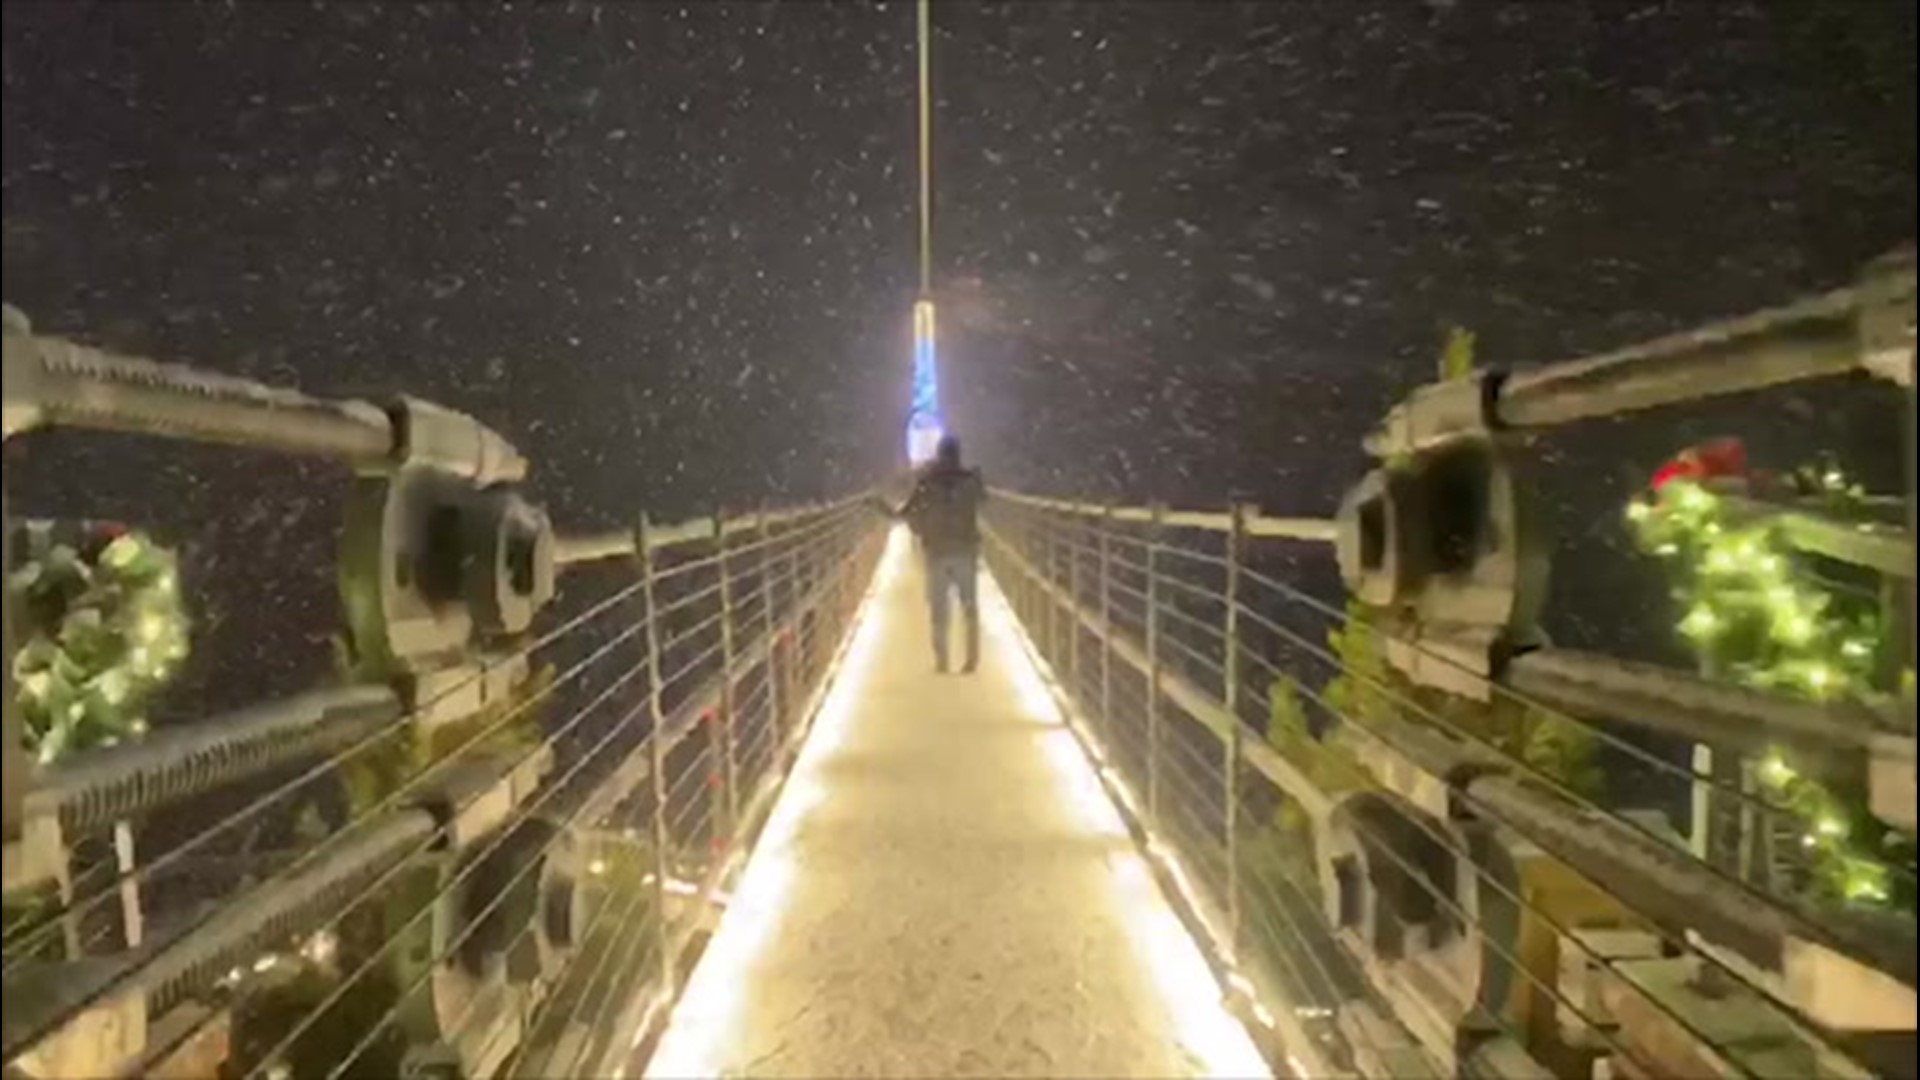 Gatlinburg's famous SkyBridge provided majestic views of a snow-covered Tennessee city on Nov. 30 as lake-effect snow extended deep into the south.